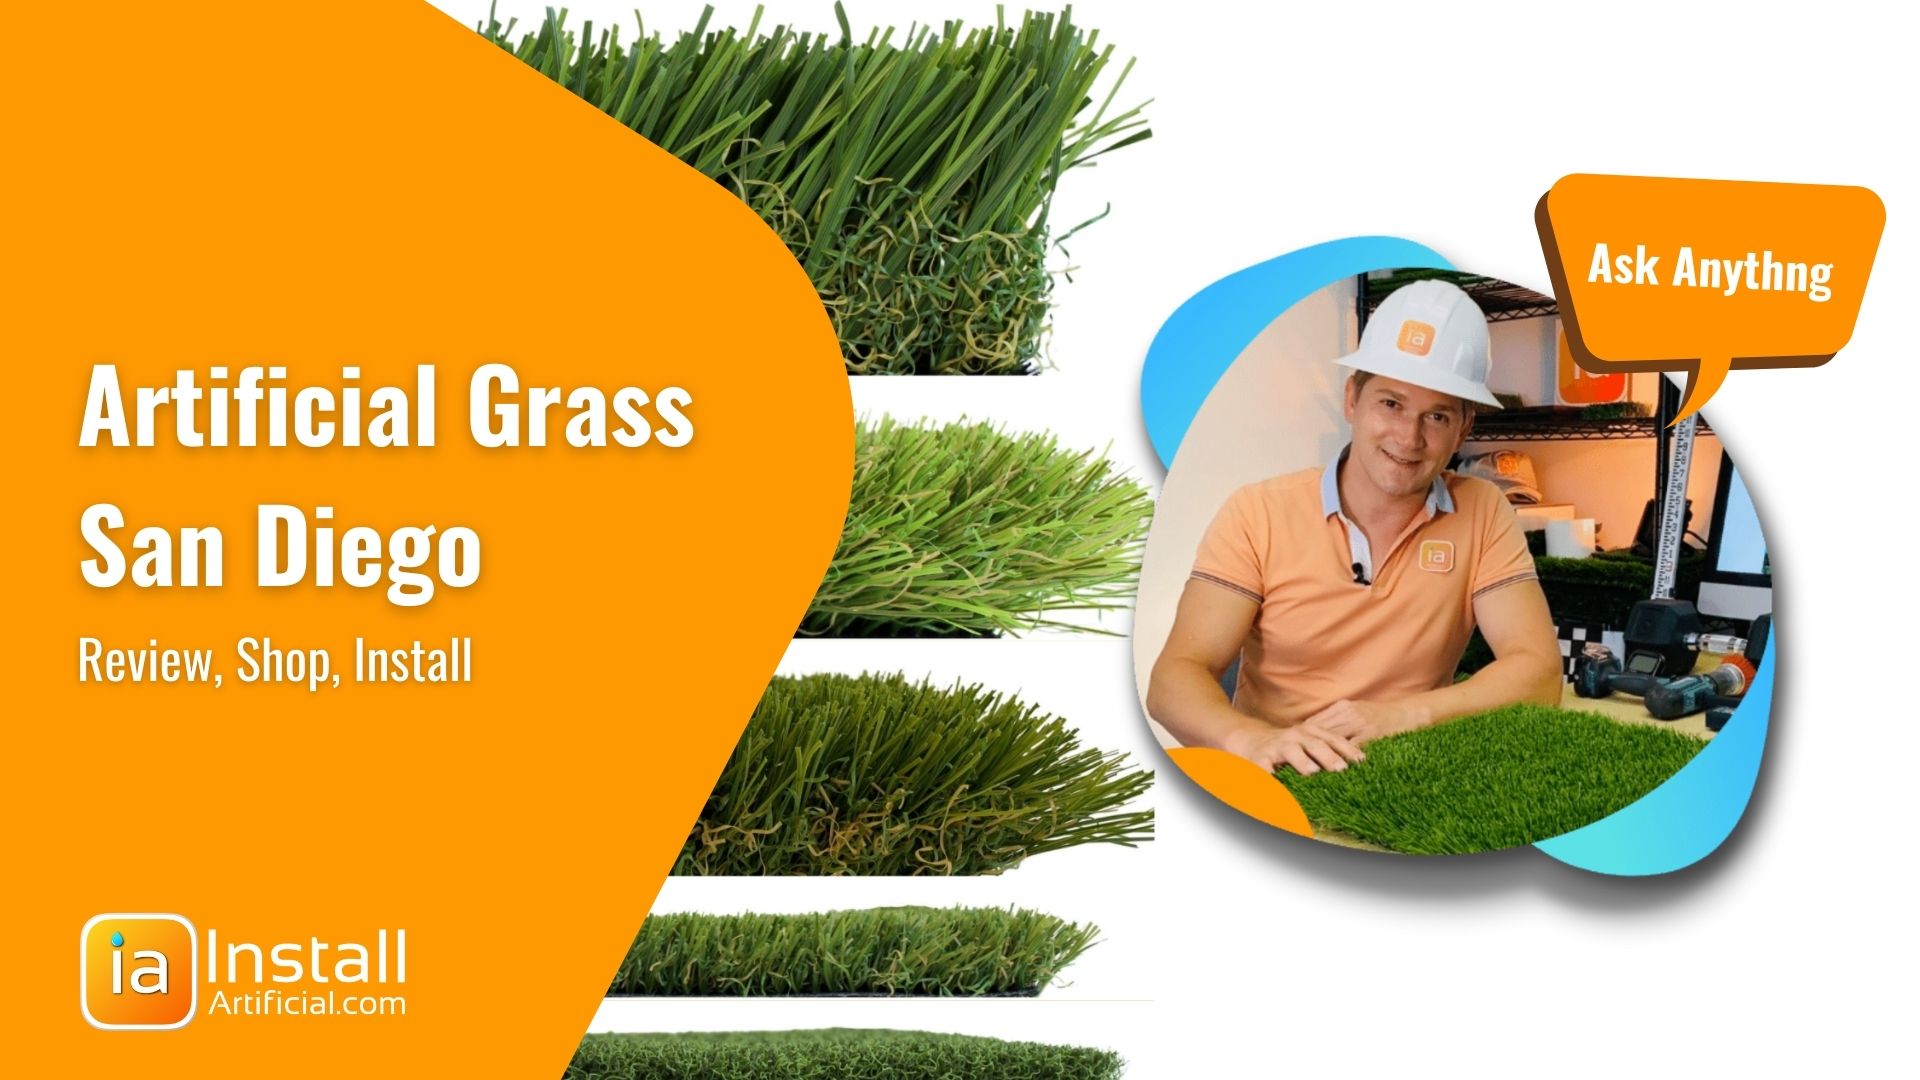 Find Artificial Grass That Meets Your Needs in San Diego